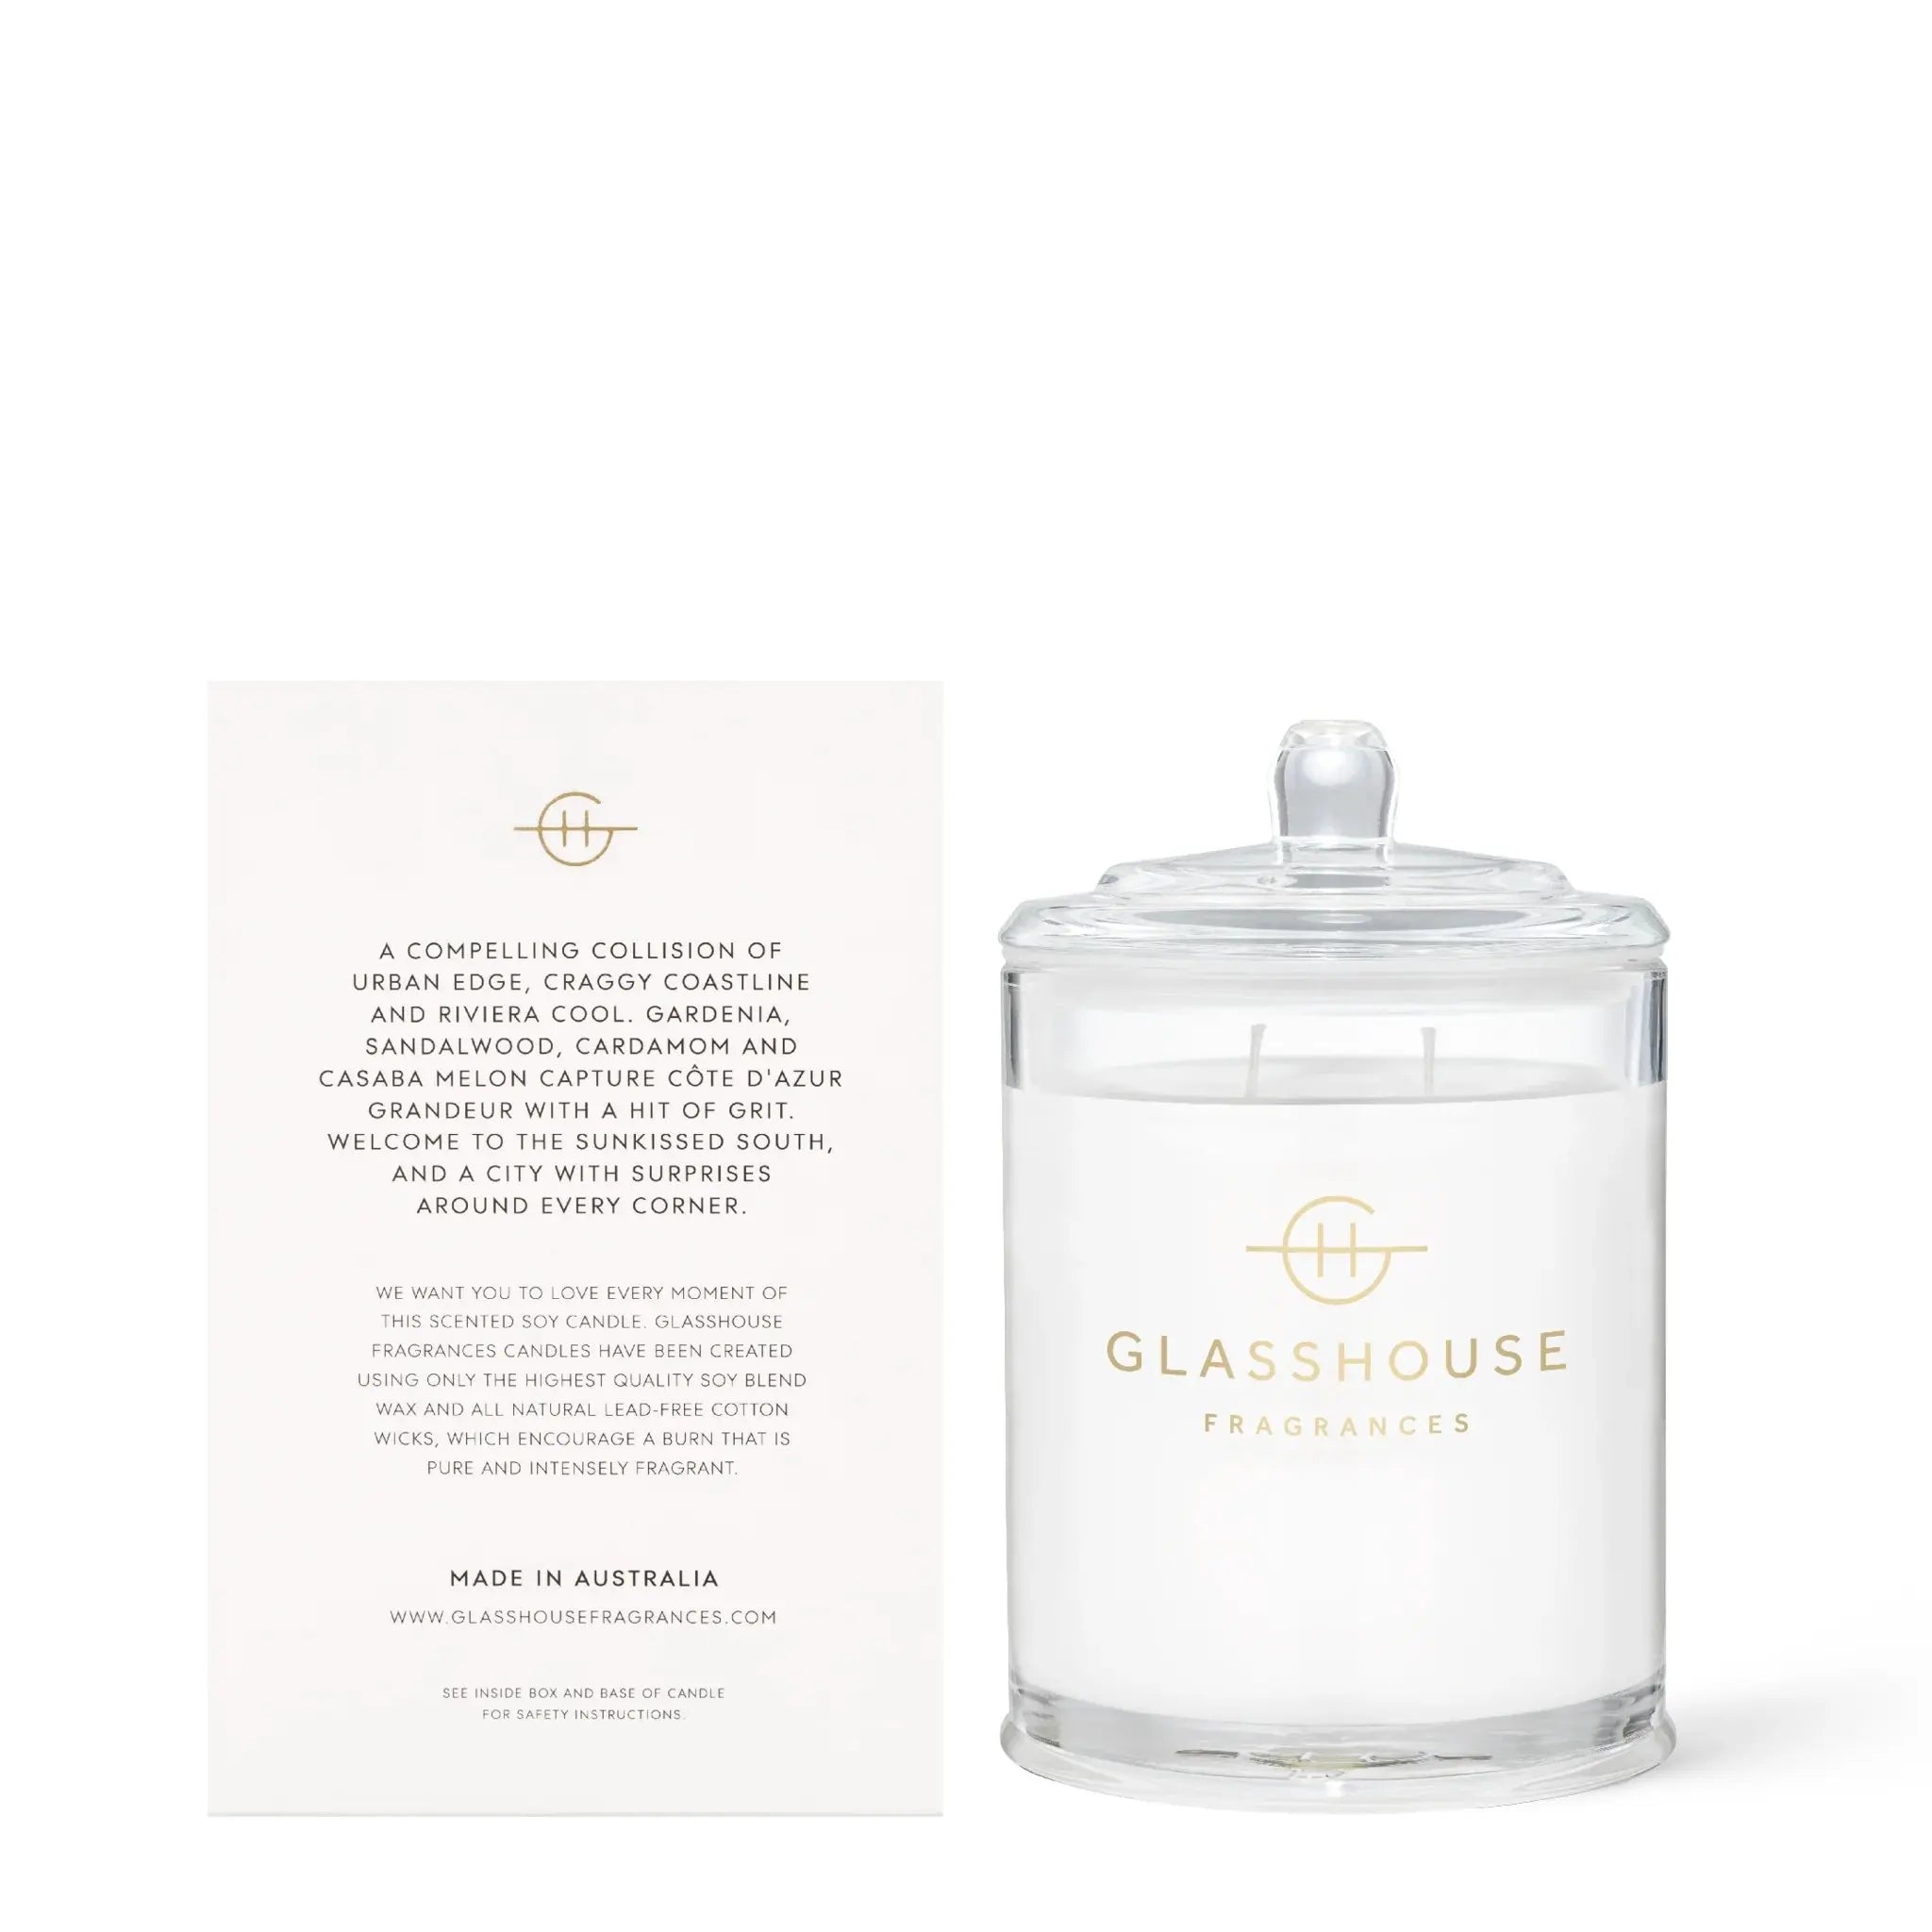 Glasshouse Fragrances Marseille Memoir Soy Candle Gardenia back of box reading, A compelling collison of urban edge, craggy coastline and riviera cool. Gardenia, sandalwood, caramom and casaba melon capture cote d'azure grandeur with a hit of grit. Welcome to the sunkissed south, and a city with surprises around every corner. We want you to love every moment of this scented soy candle. Glasshouse fragrances candles have been created using only the highest quality soy blend wax and all natural led-free cotto